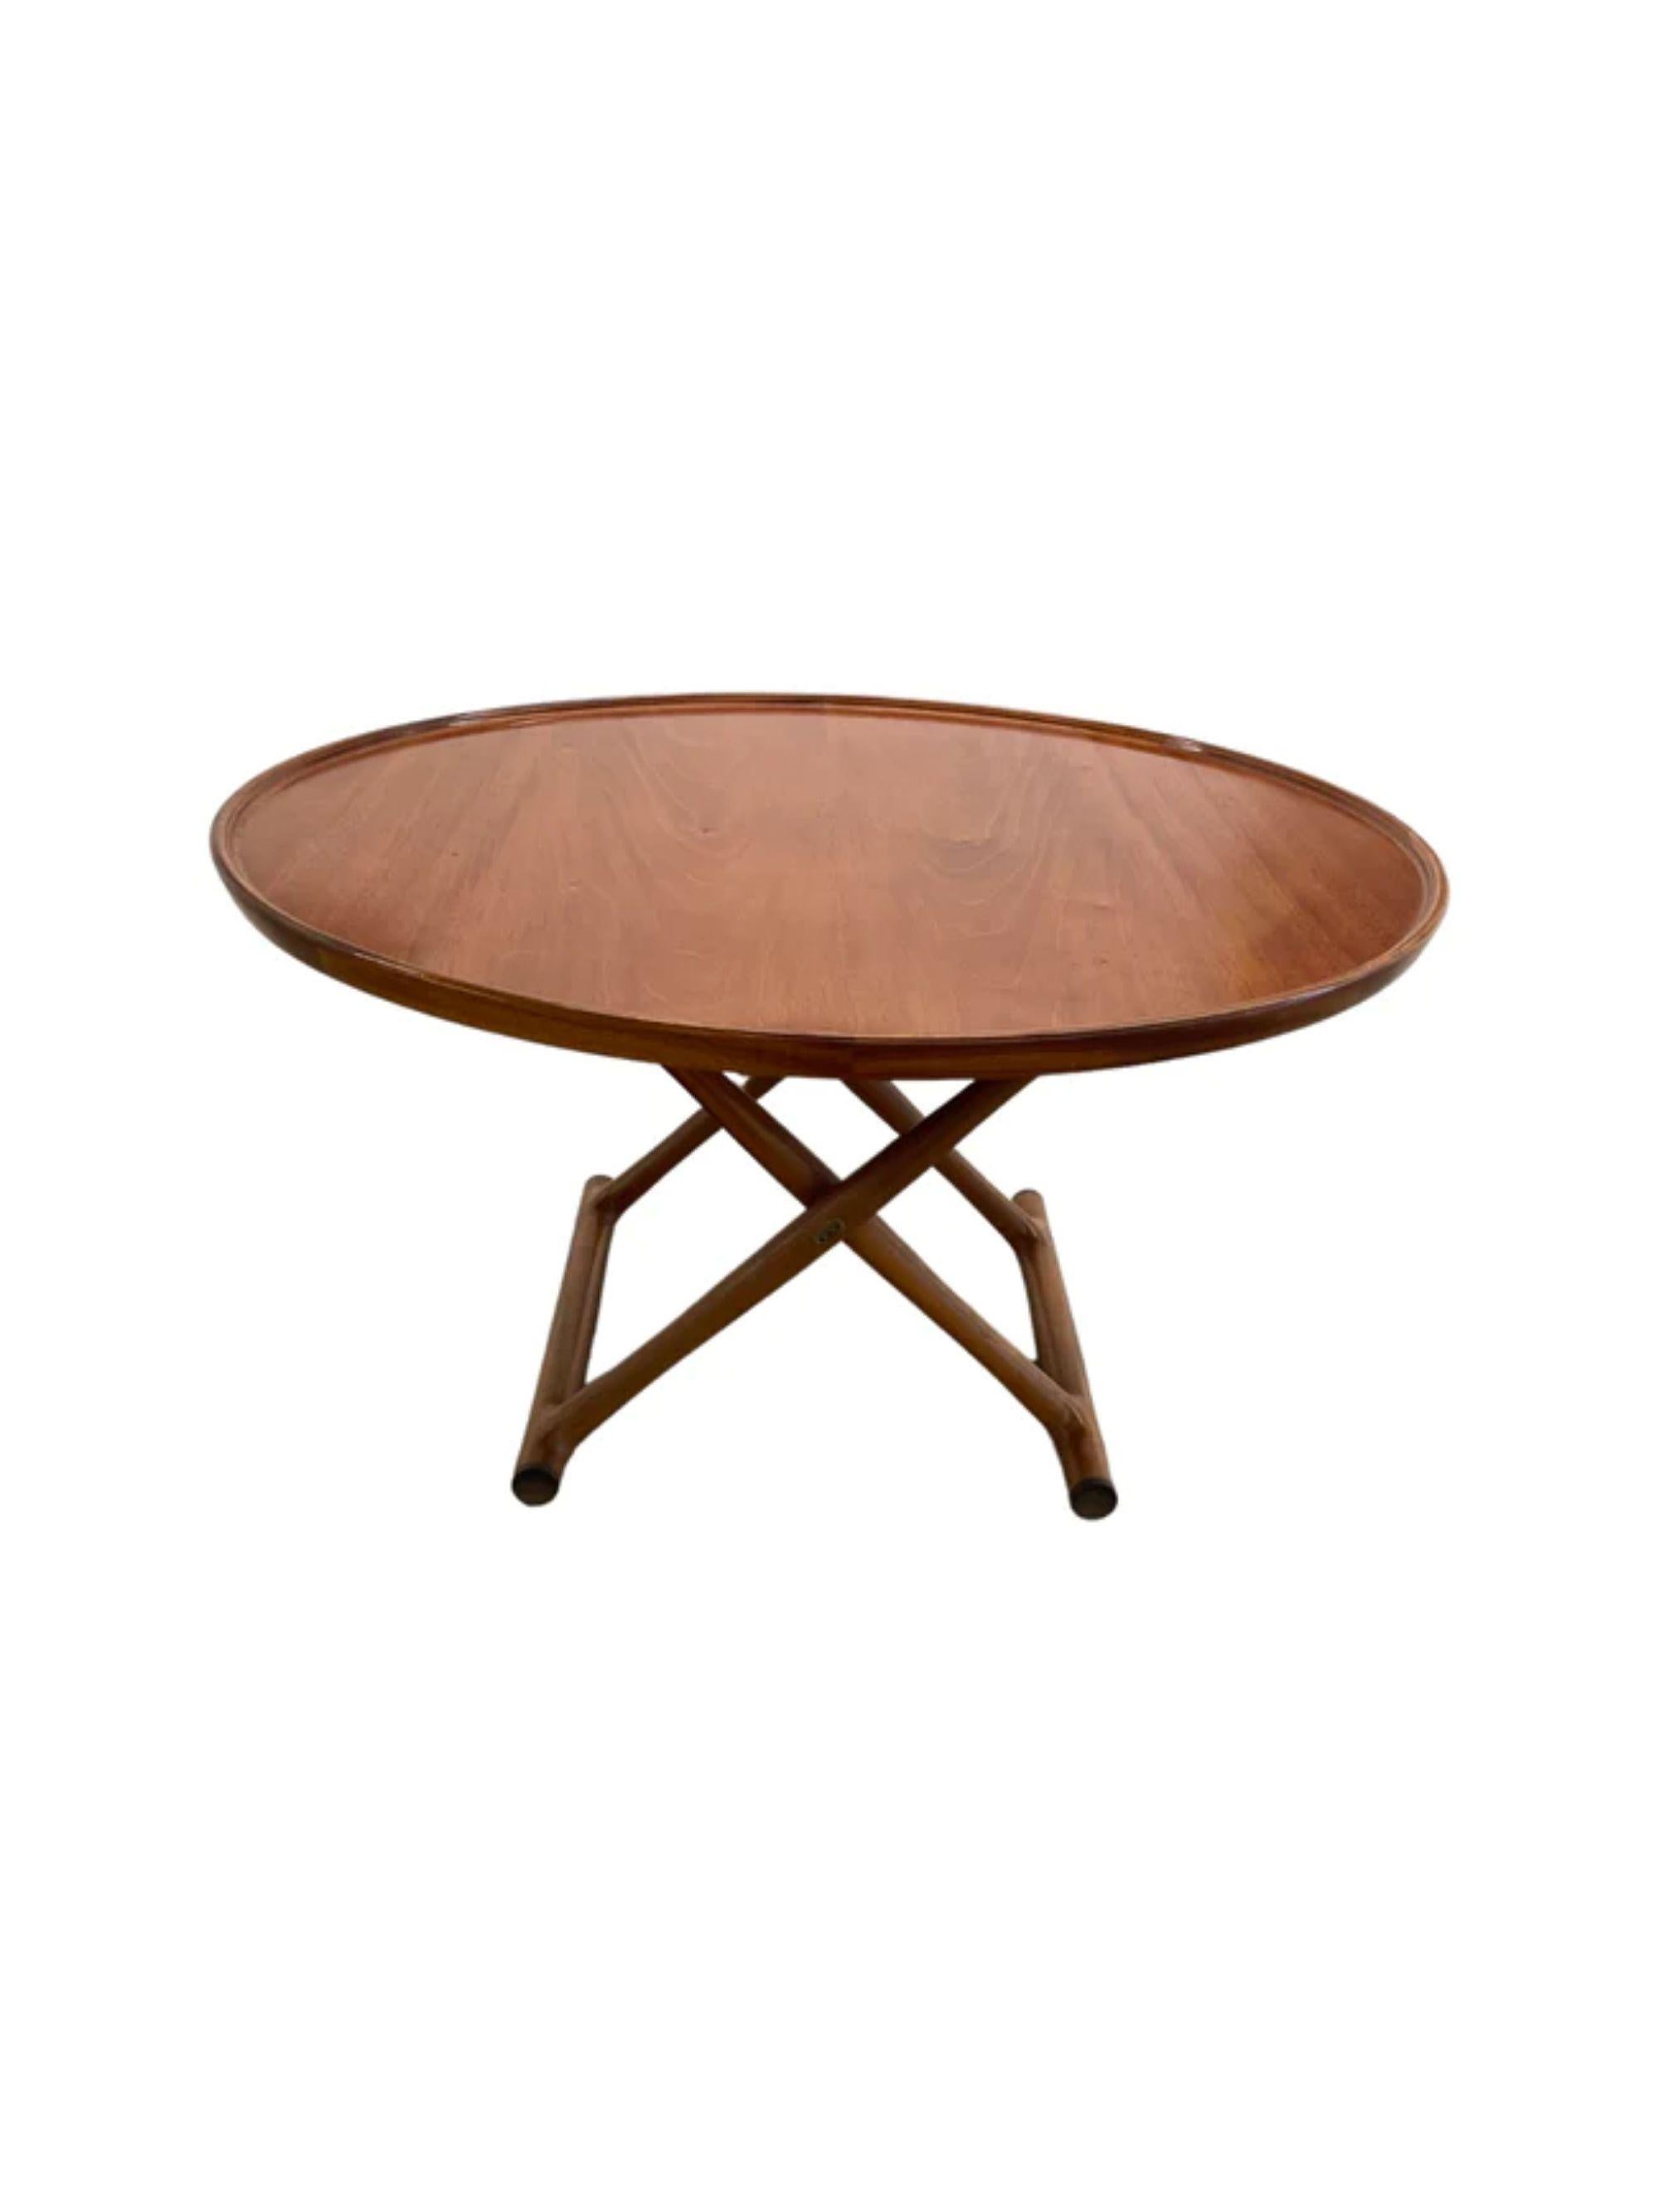 Mogens Lassen rare large size Mahogany early “Egyptian” folding occasional coffee table for A.J. Iversen, Denmark circa 1940. In excellent condition.

Materials: Cuban Mahogany, brass
Dimensions: 20 1/2